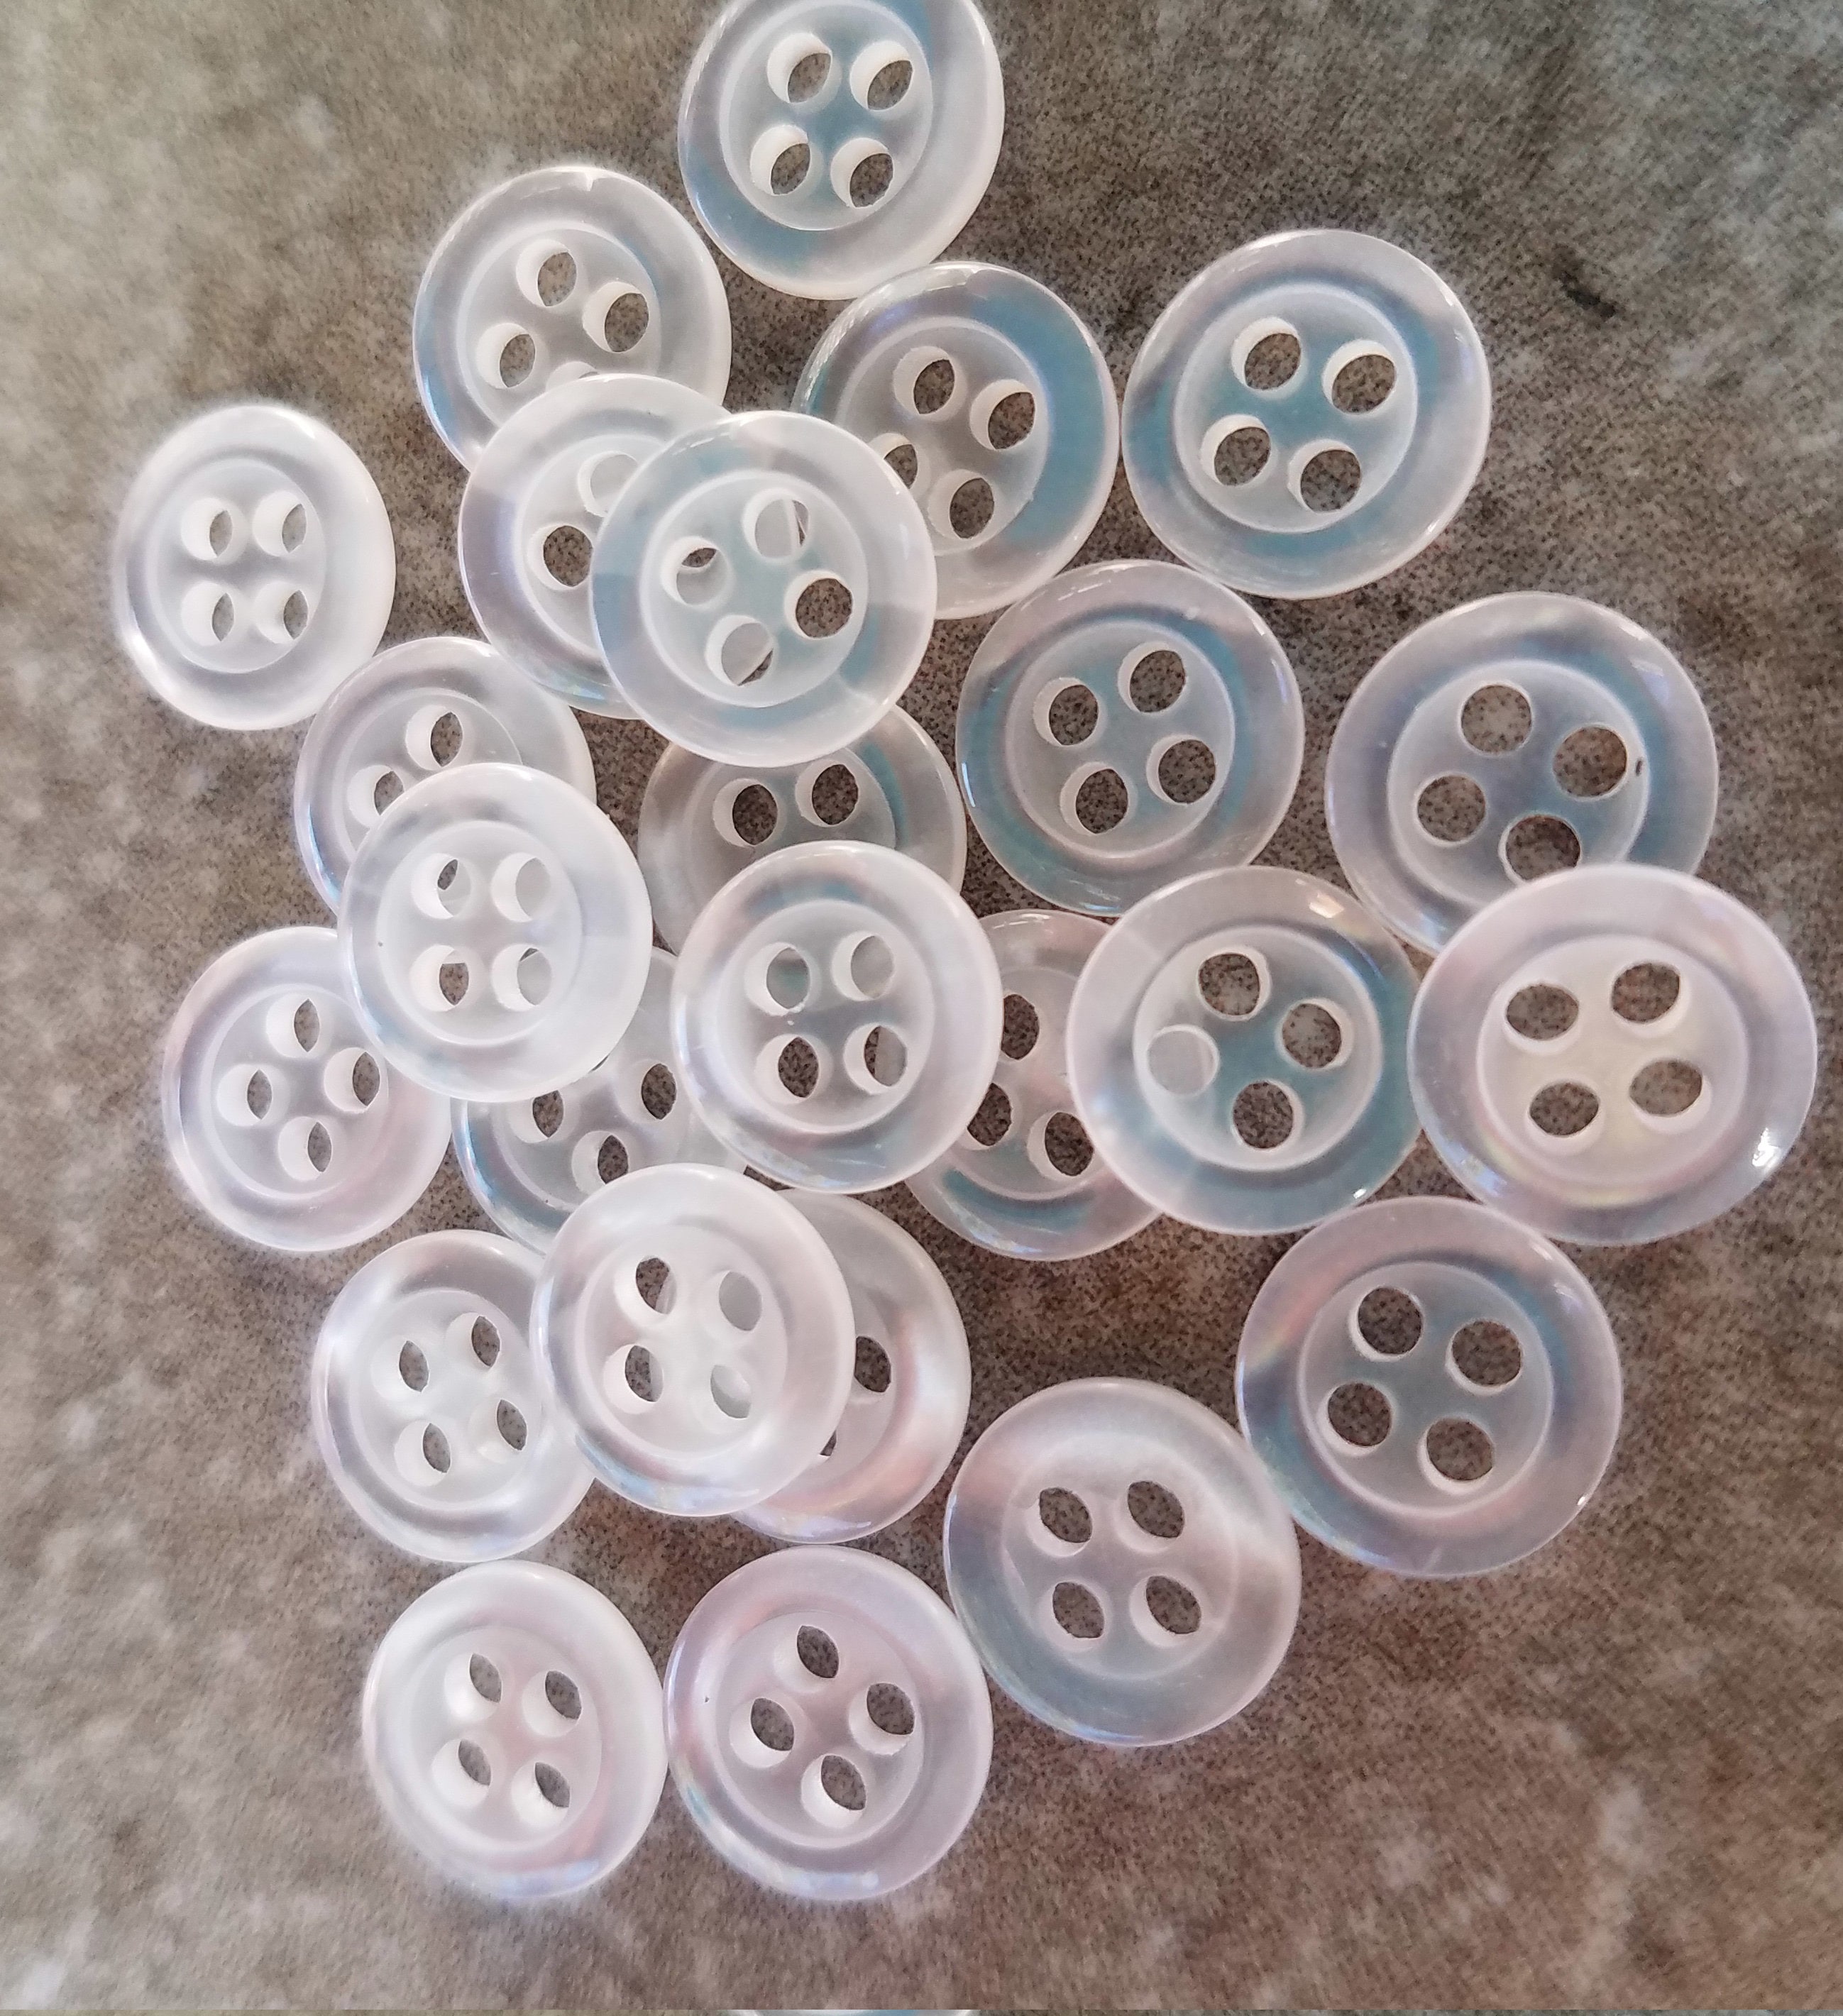 Sewing Buttons, 25mm Buttons, 1 Inch Round Buttons, Flat Back Buttons, Bulk  Buttons, Resin Buttons, Plastic Buttons, WHITE, CLEAR, or BLACK 